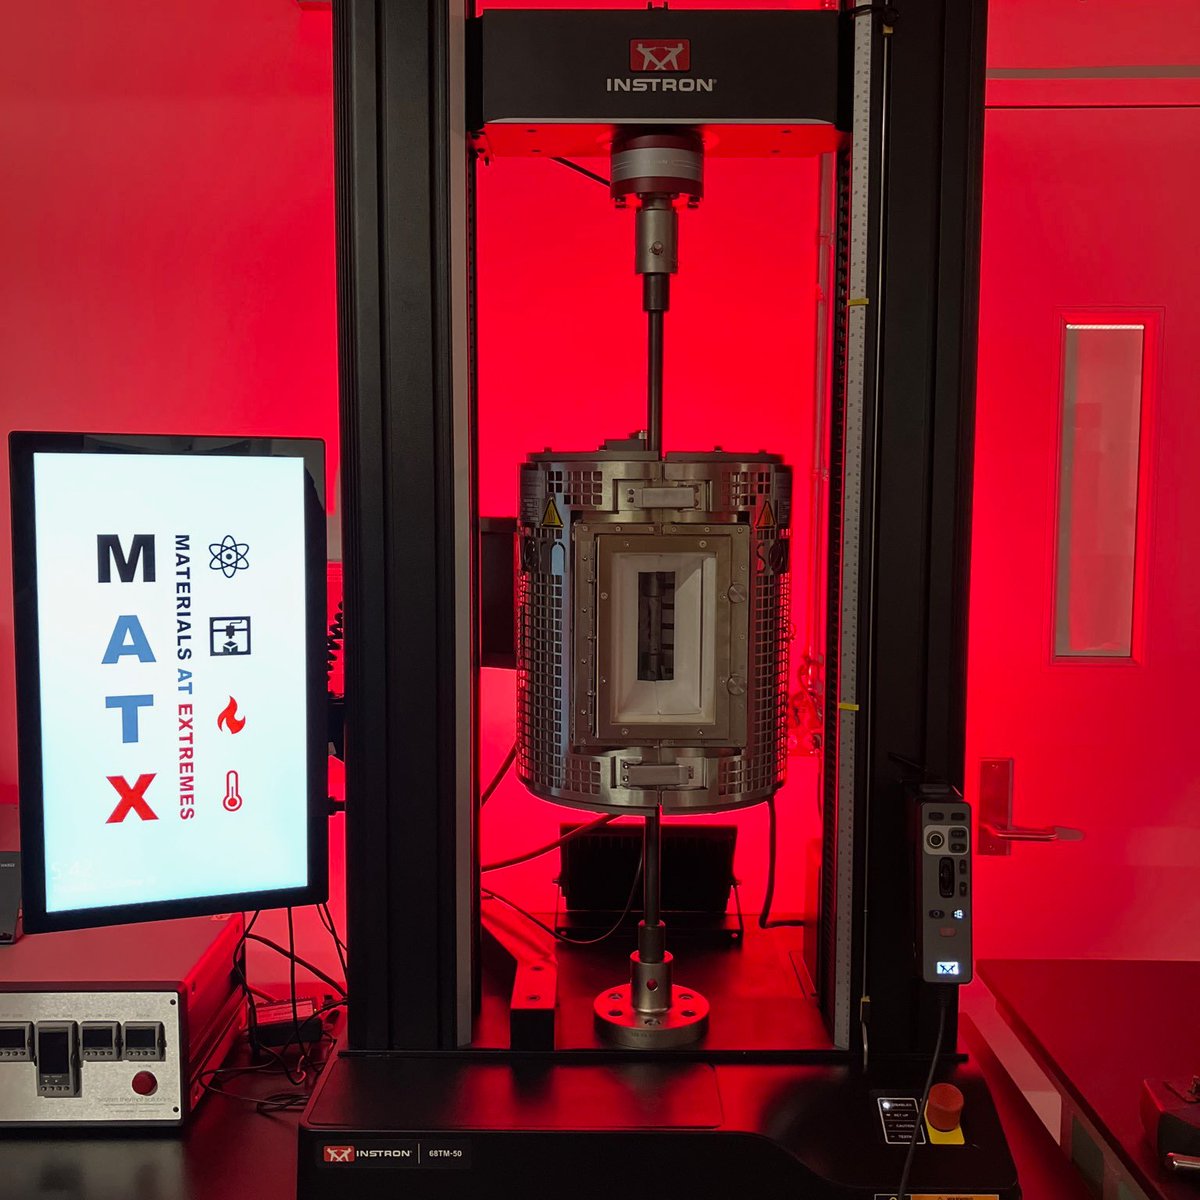 Mechanical Testing at 1000°C with 3D-DIC!
Phase 1 of the MATX Labs is 90% complete.
Would you come to an Open House?
#3dprinting #materialsscience #testing #testequipment #mechanicalengineering #aerospace #space #metallurgy #metallurgicalengineering #nuclear